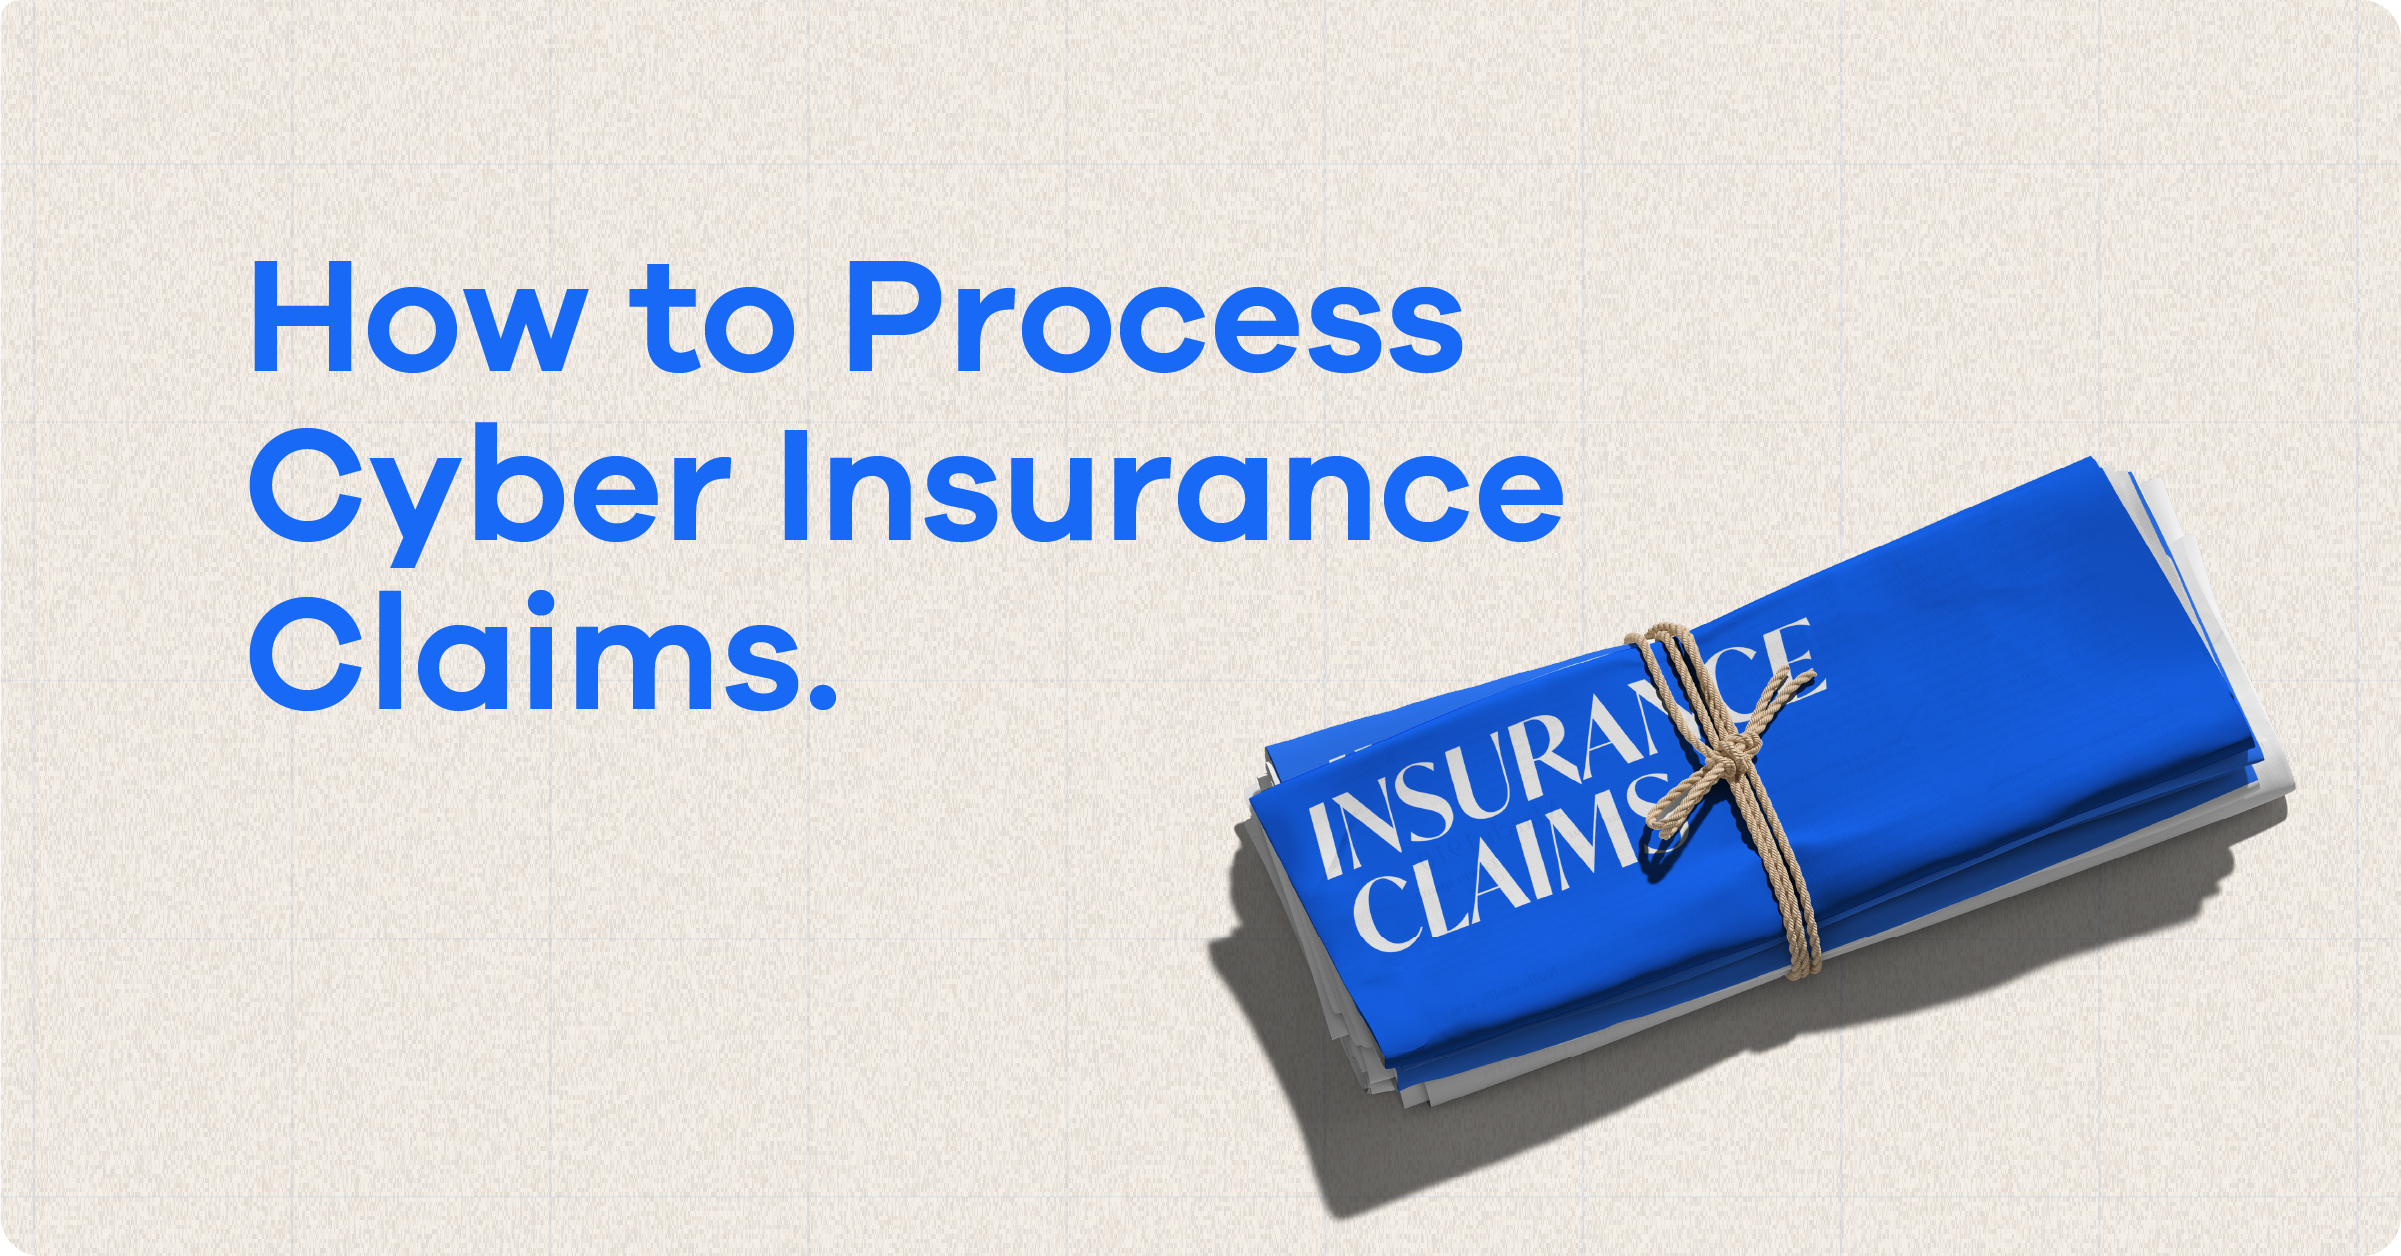 Cyber Insurance Claims